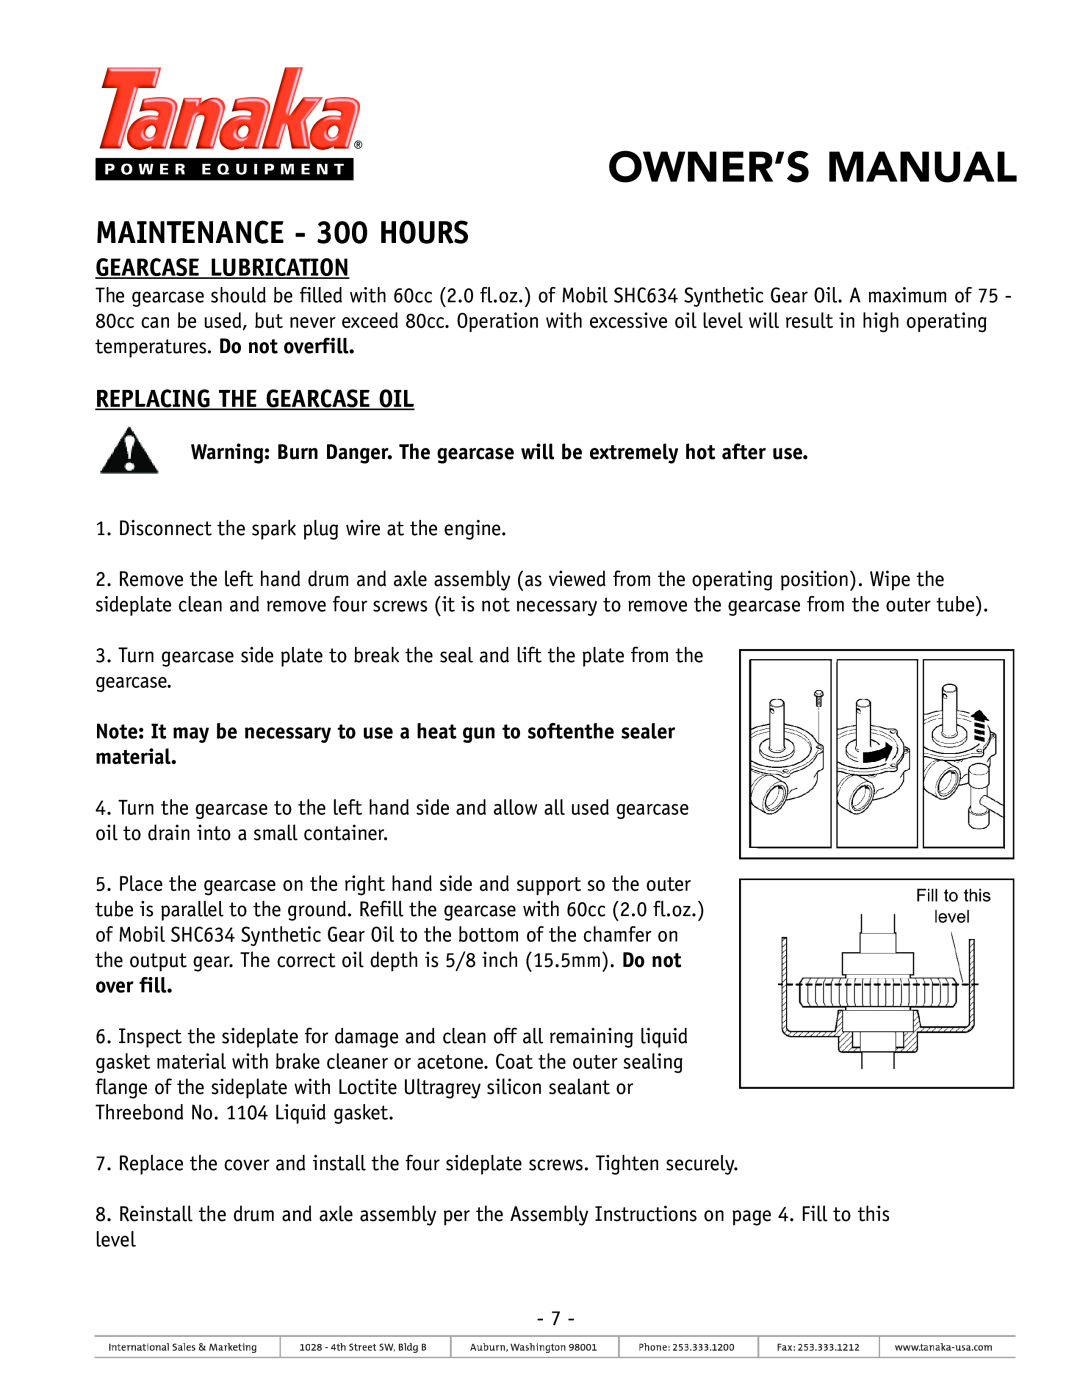 Tanaka TSW-210 owner manual MAINTENANCE - 300 HOURS, Gearcase Lubrication, Replacing The Gearcase Oil 